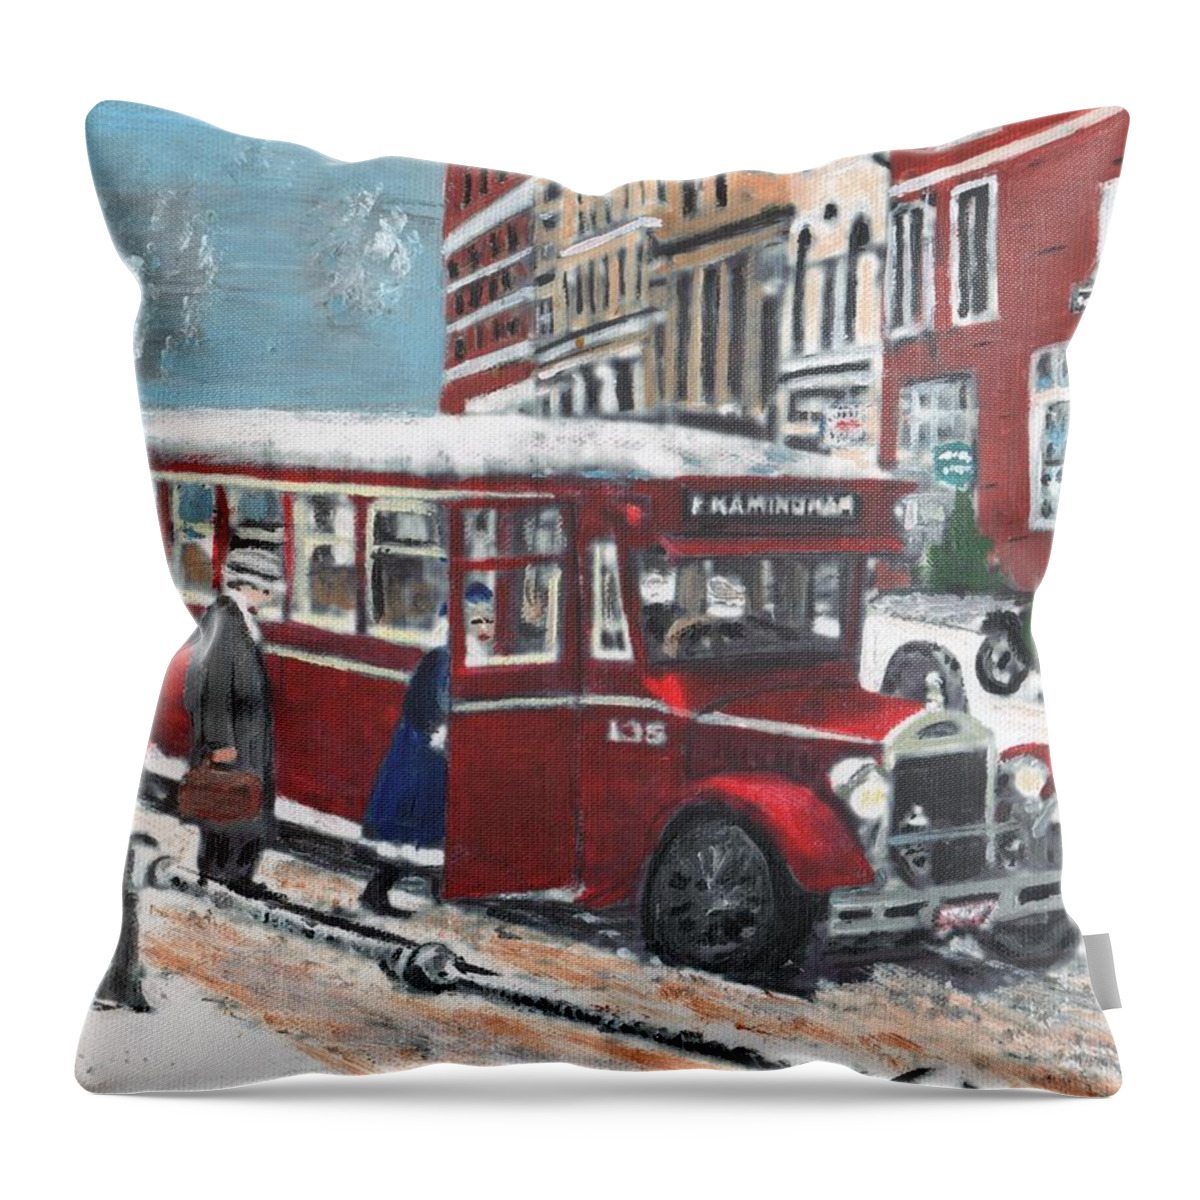 Vintage Bus Throw Pillow featuring the painting Framingham Bus by Cliff Wilson